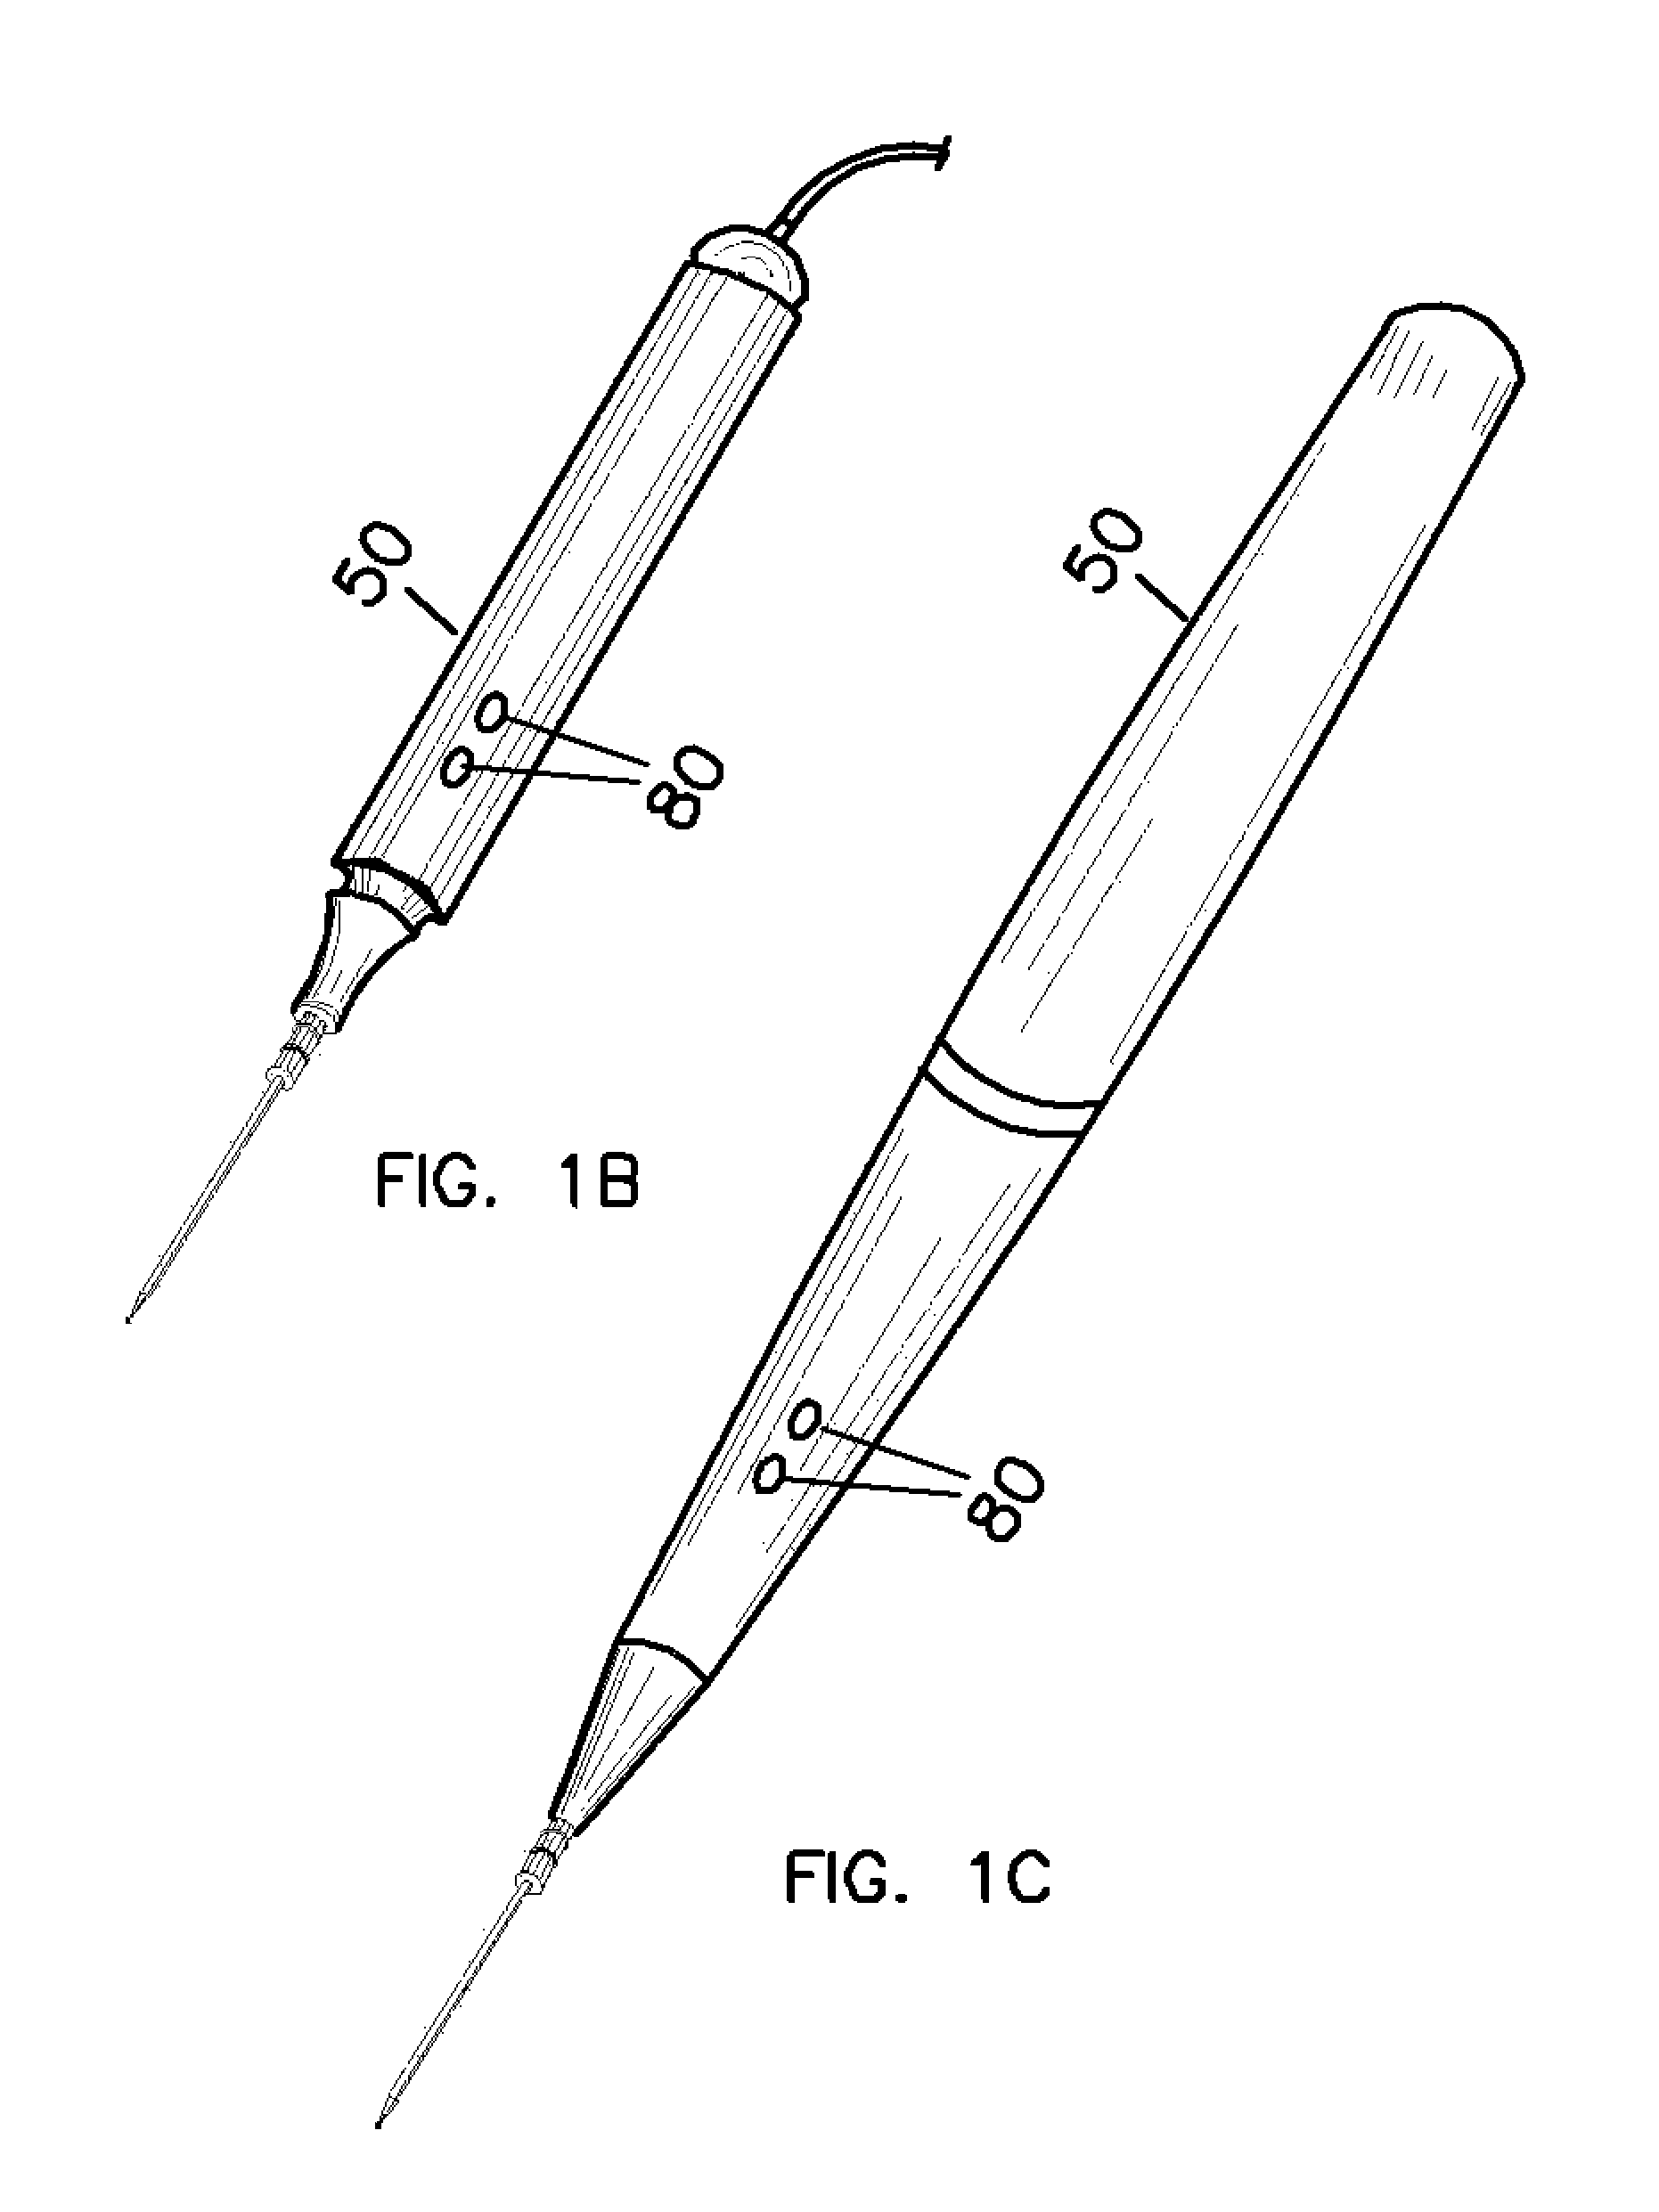 Medical heating device and method with self-limiting electrical heating element